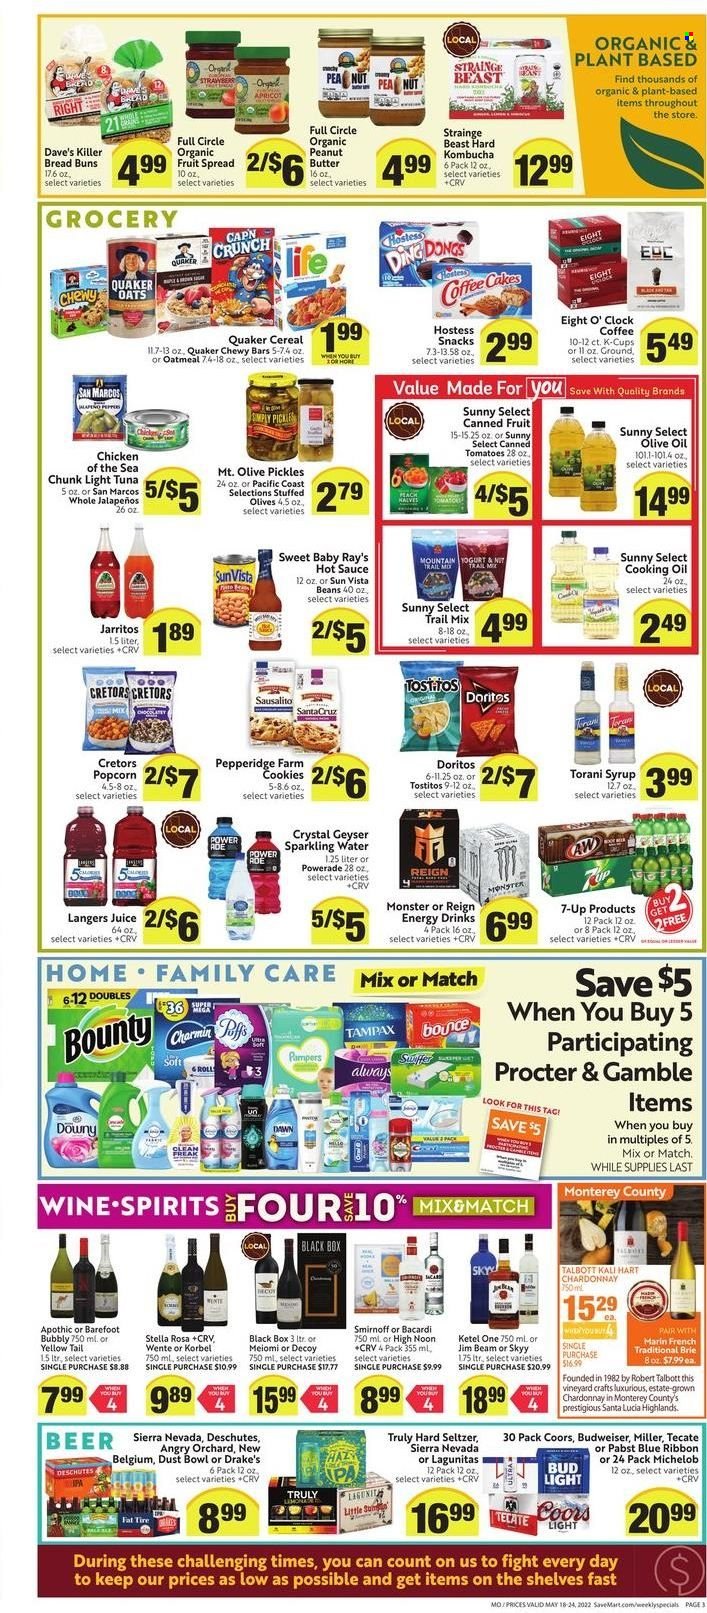 thumbnail - Save Mart Flyer - 05/18/2022 - 05/24/2022 - Sales products - bread, cake, buns, tomatoes, tuna, sauce, Quaker, brie, cookies, snack, Bounty, Santa, Doritos, popcorn, Tostitos, oatmeal, oats, pickles, olives, light tuna, Chicken of the Sea, canned fruit, cereals, hot sauce, olive oil, oil, cooking oil, peanut butter, syrup, trail mix, Powerade, energy drink, Monster, 7UP, sparkling water, kombucha, coffee capsules, K-Cups, white wine, Chardonnay, Bacardi, Smirnoff, SKYY, Jim Beam, Hard Seltzer, TRULY, beer, Bud Light, Miller, Pabst Blue Ribbon, Pampers, Bounce, clock, Budweiser, Coors, Michelob. Page 3.